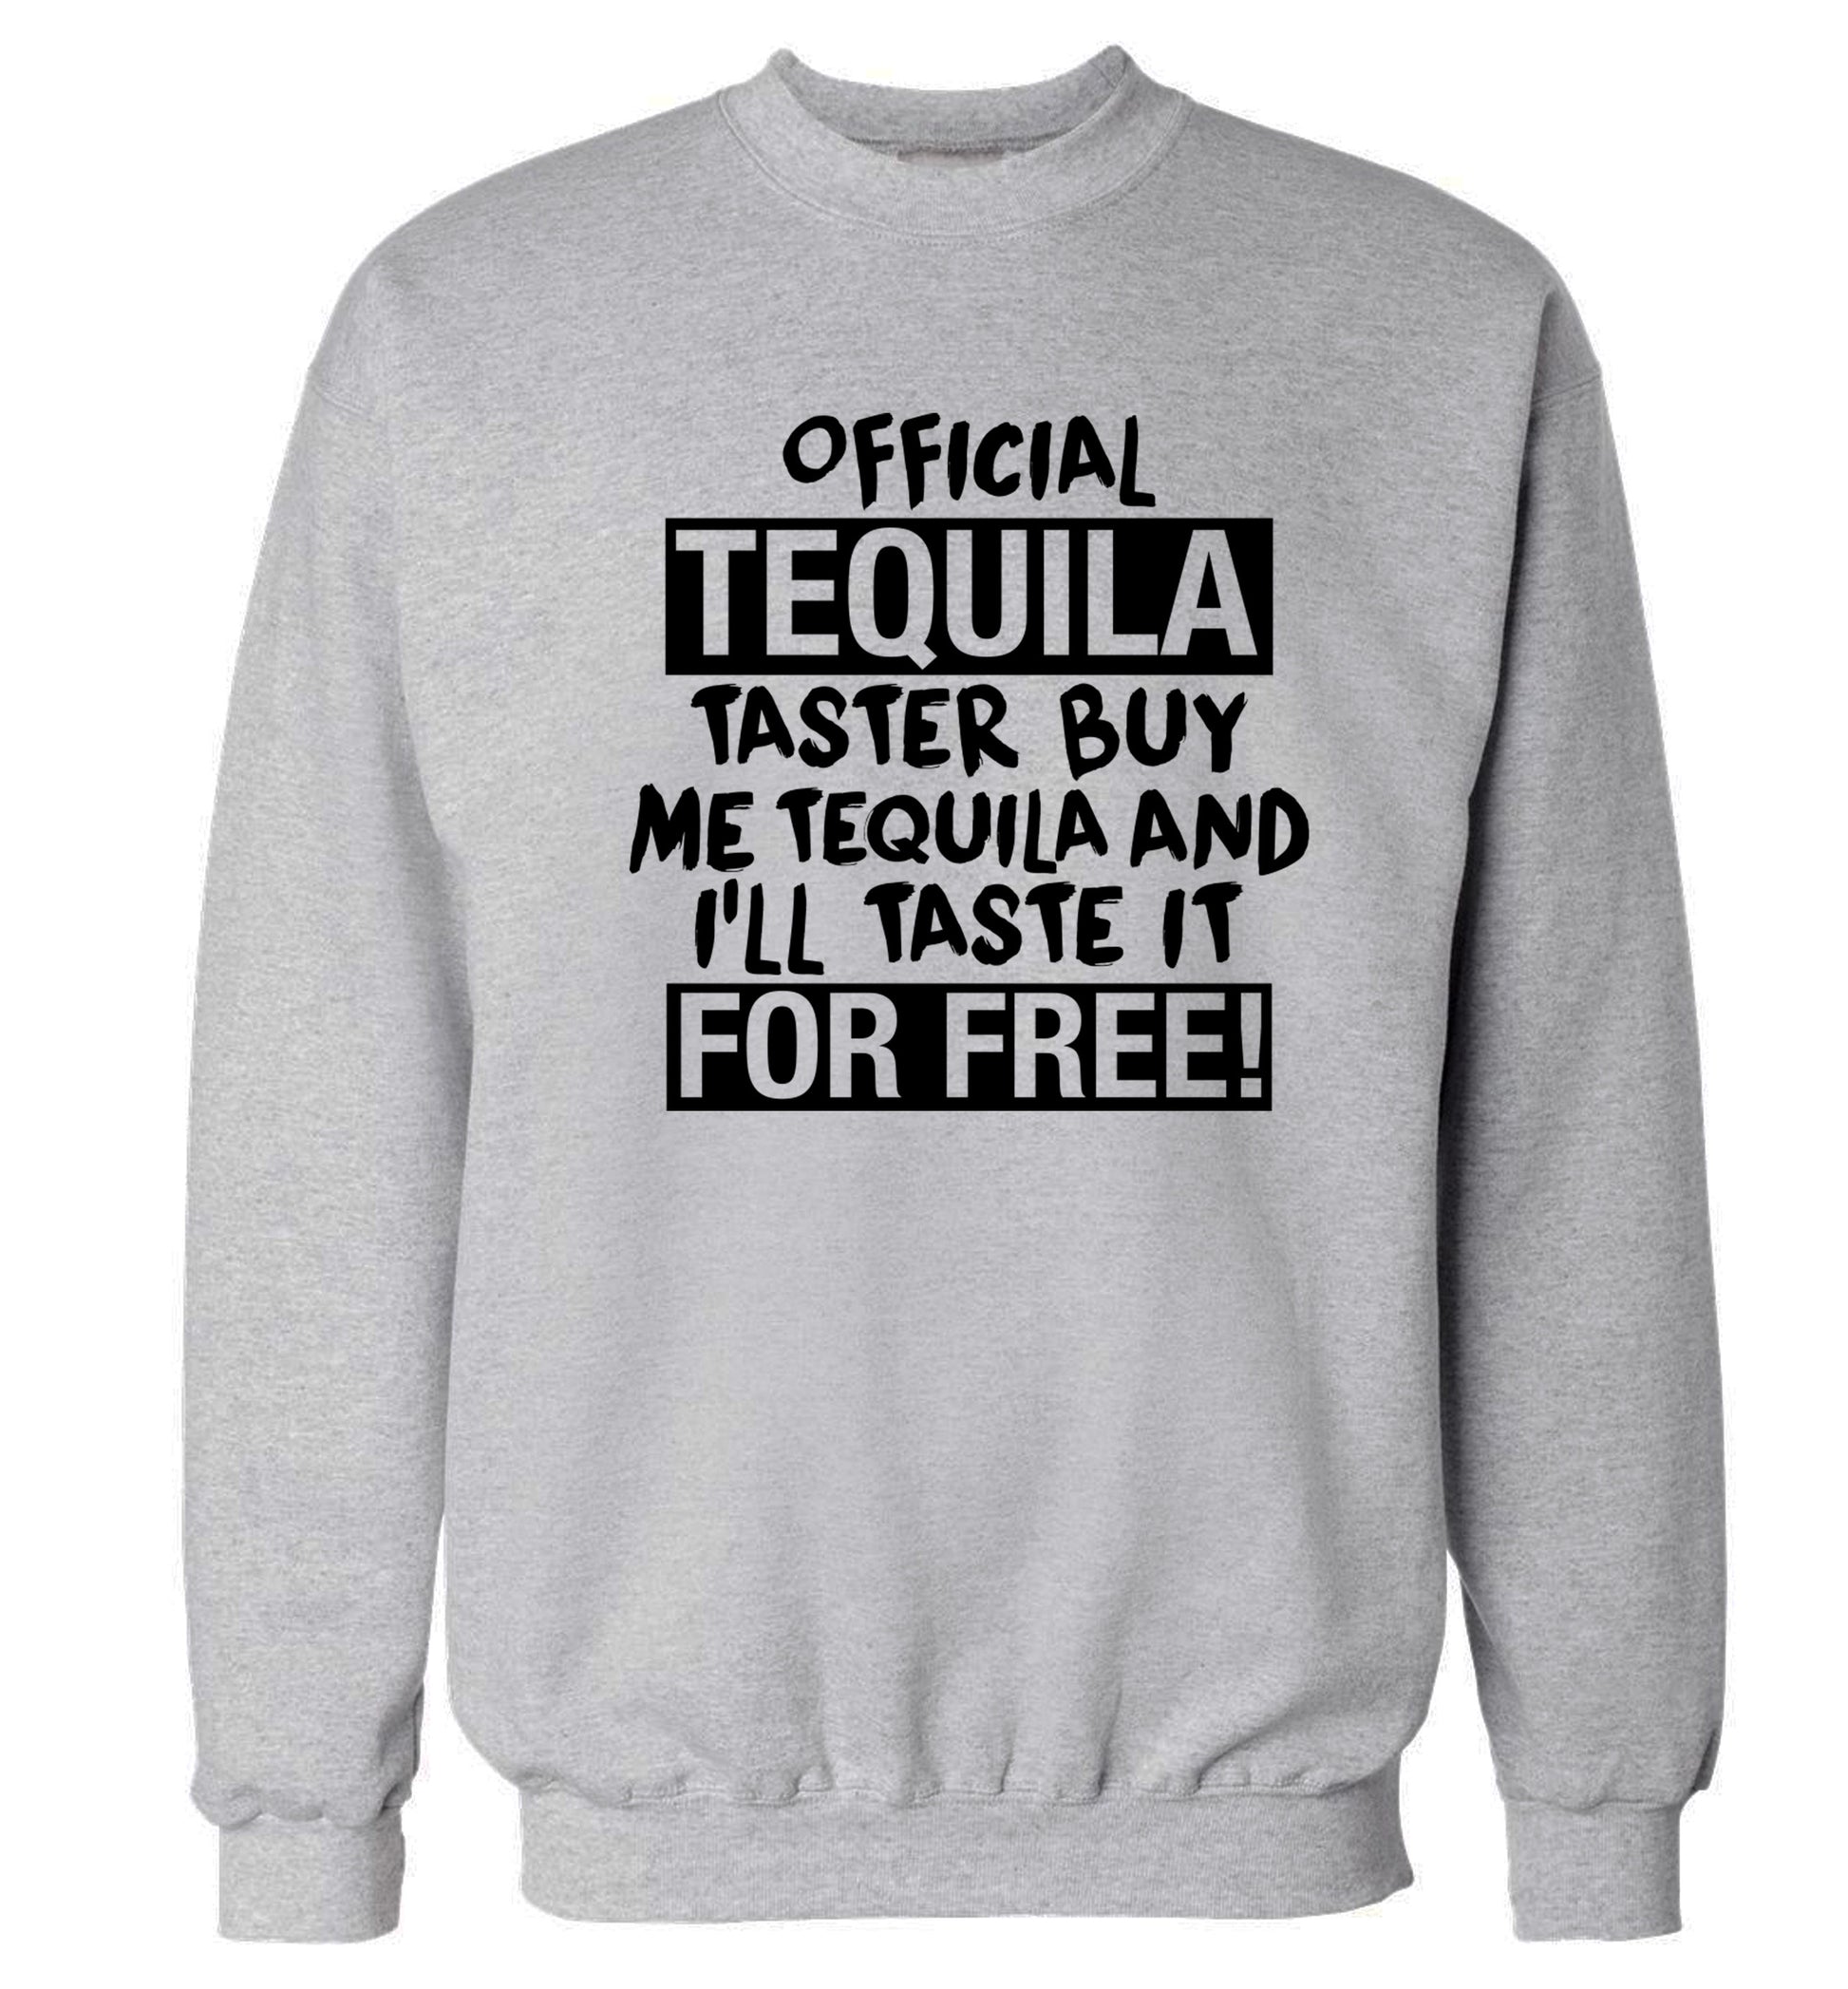 Official tequila taster buy me tequila and I'll taste it for free Adult's unisex grey Sweater 2XL